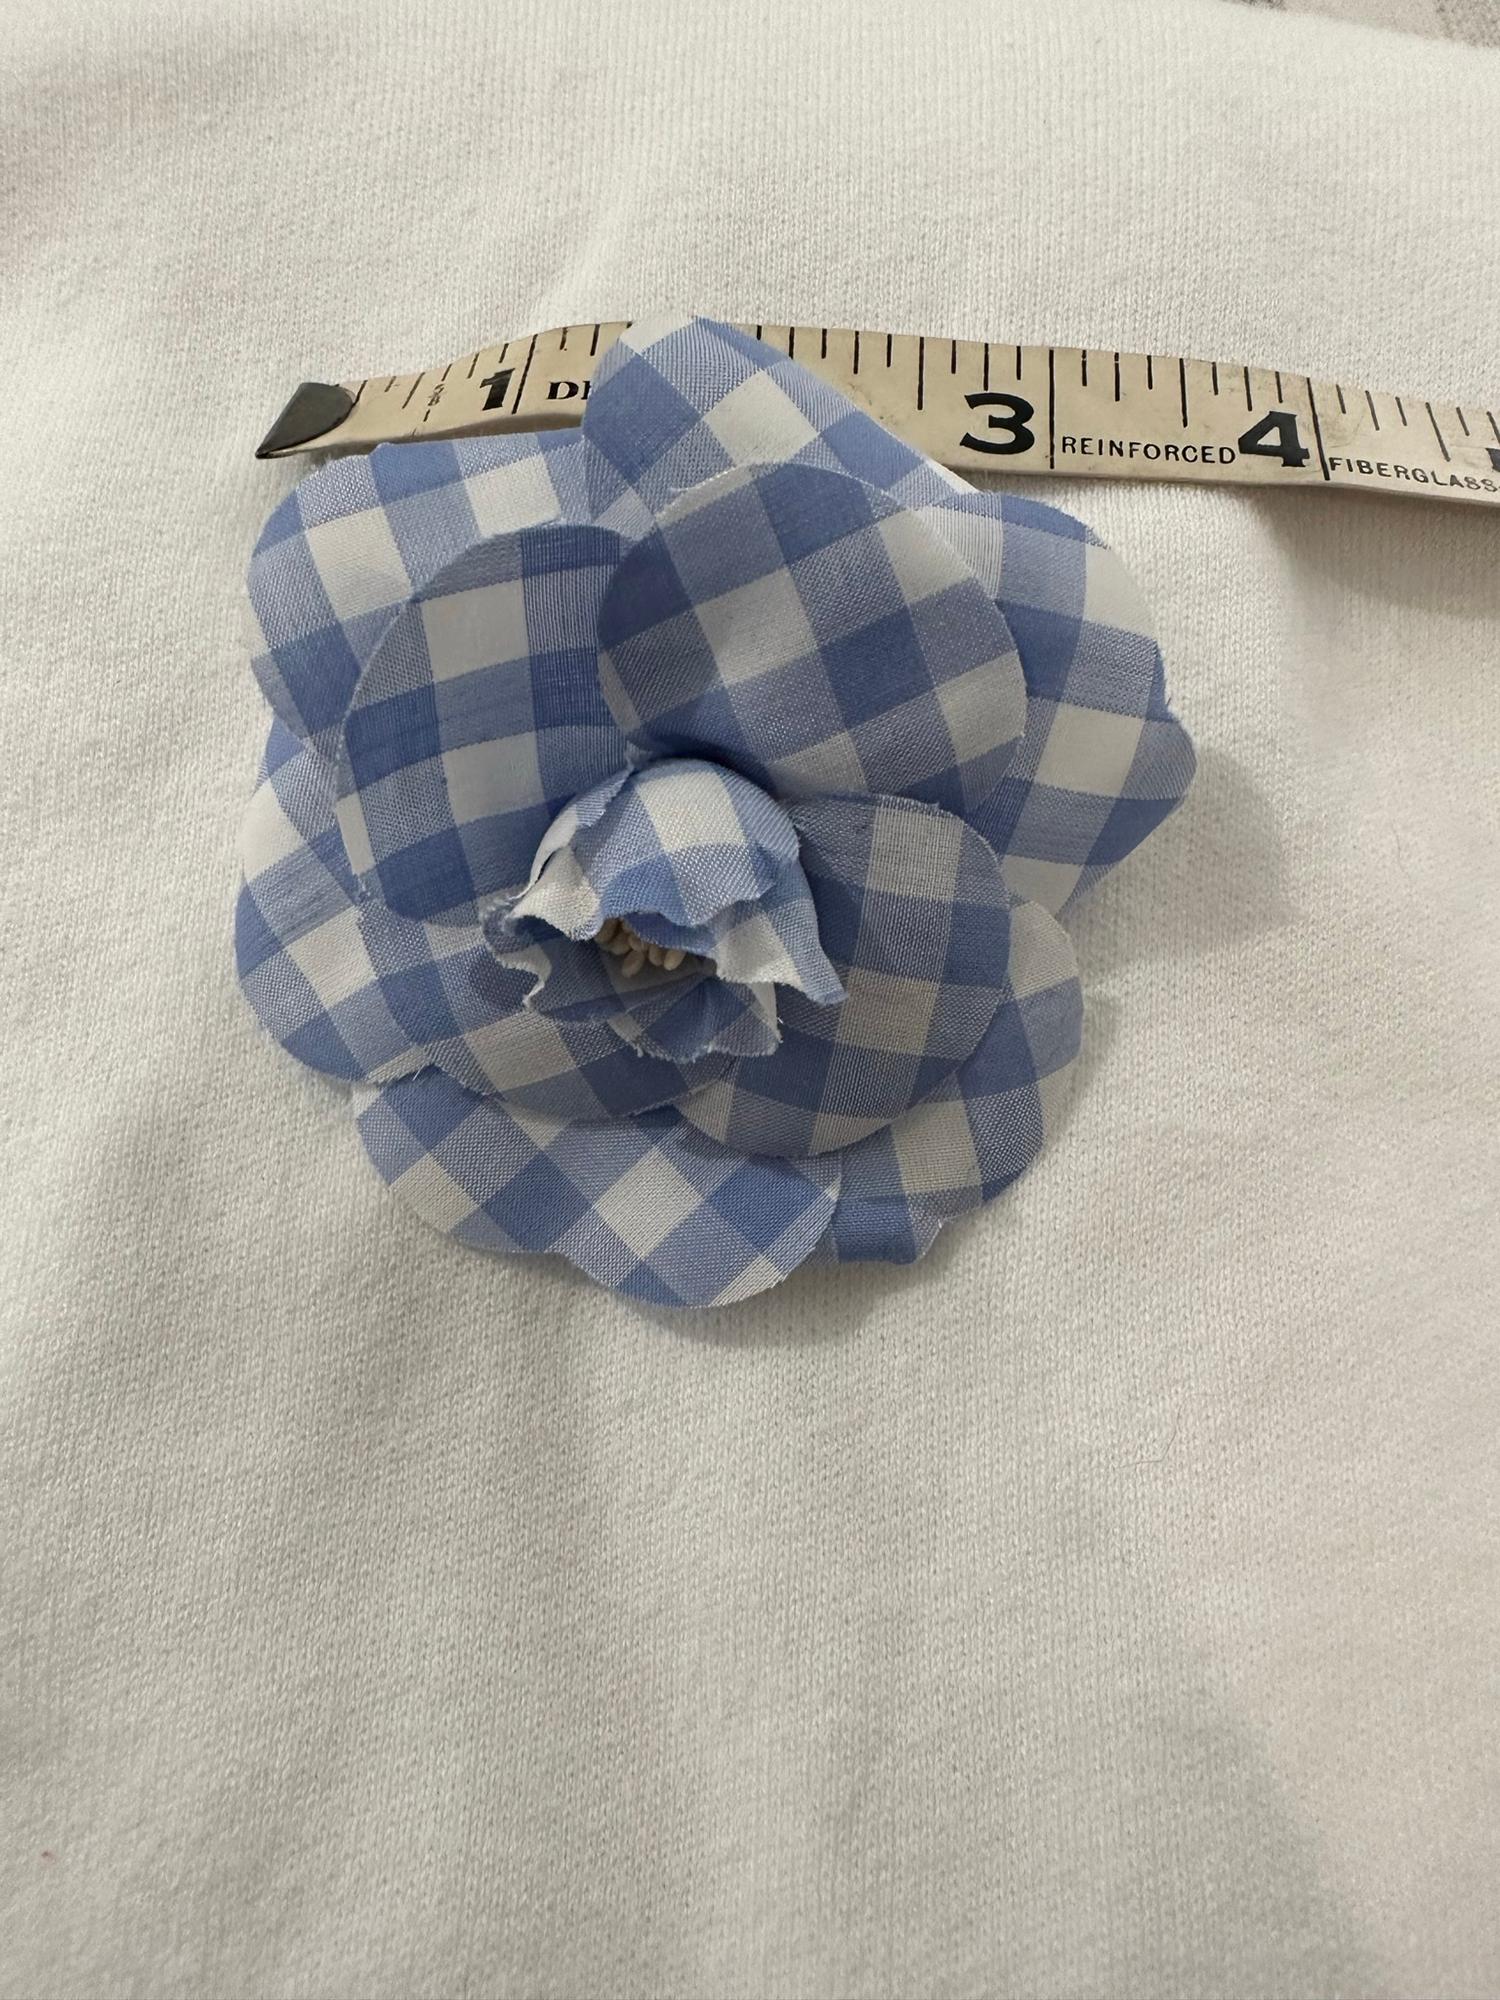 Women's or Men's Chanel Rare to Find S/S 1995 Blue & White Gingham Camellia Flower Pin  